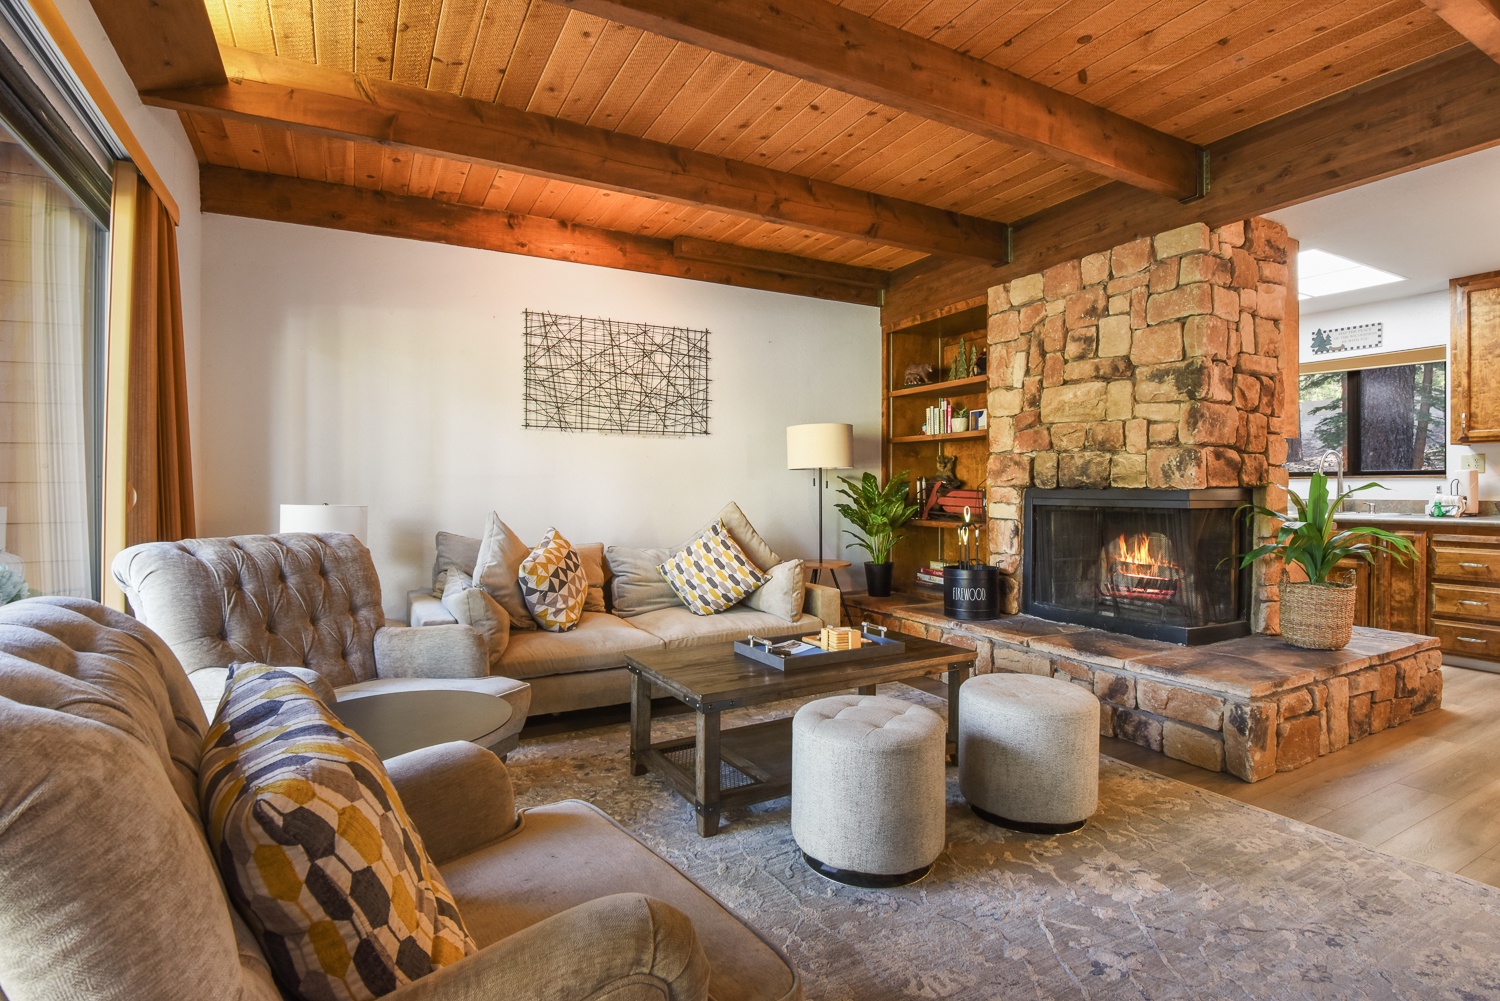 Unit #3: Curl up for a snooze or a movie by the fire in the elegant, plush living room